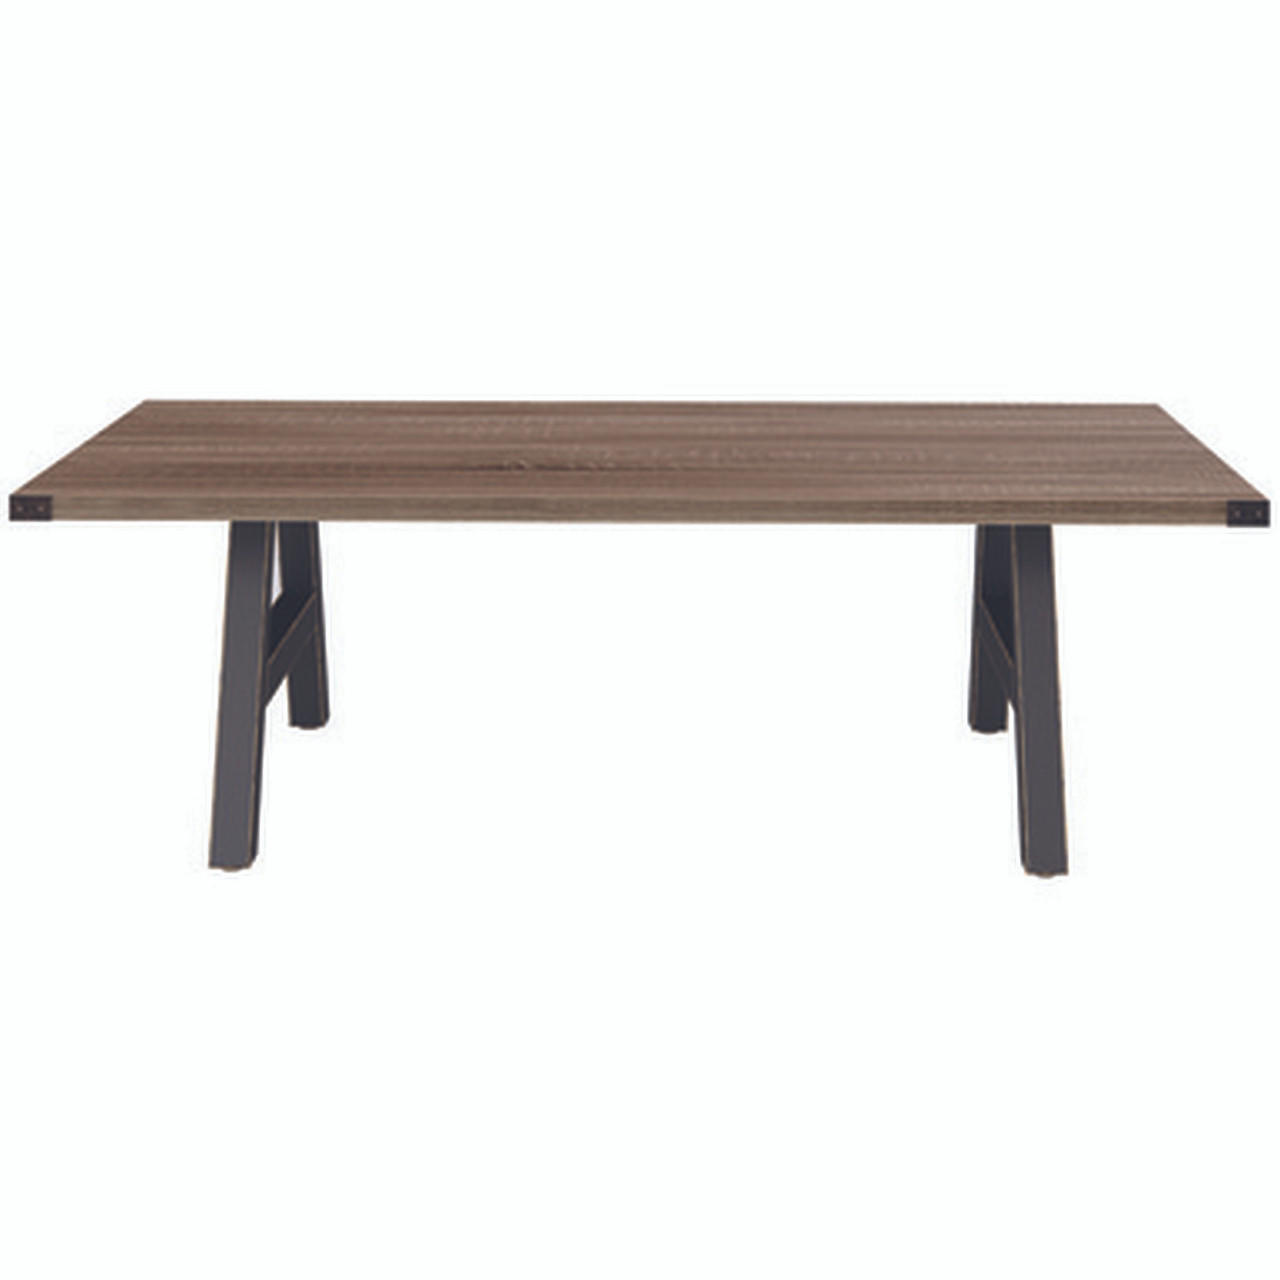  Office Source Epitome Rustic Industrial Conference Room Table IDC9648 